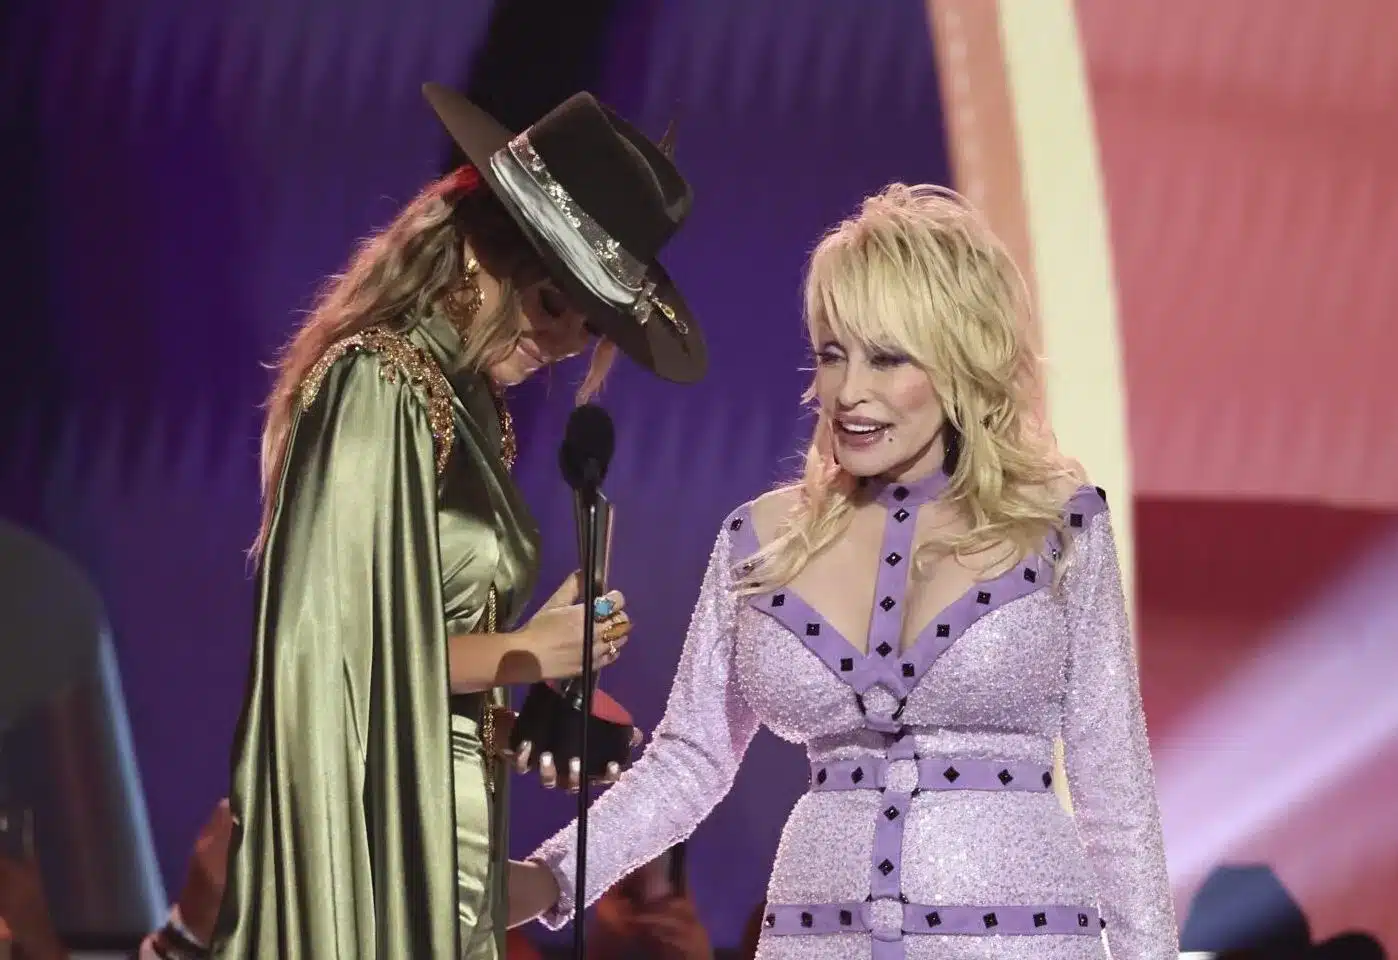 Dolly Parton and Lainey Wilson met at the ACM Awards in 2023 when Dolly presented an award to Lainey